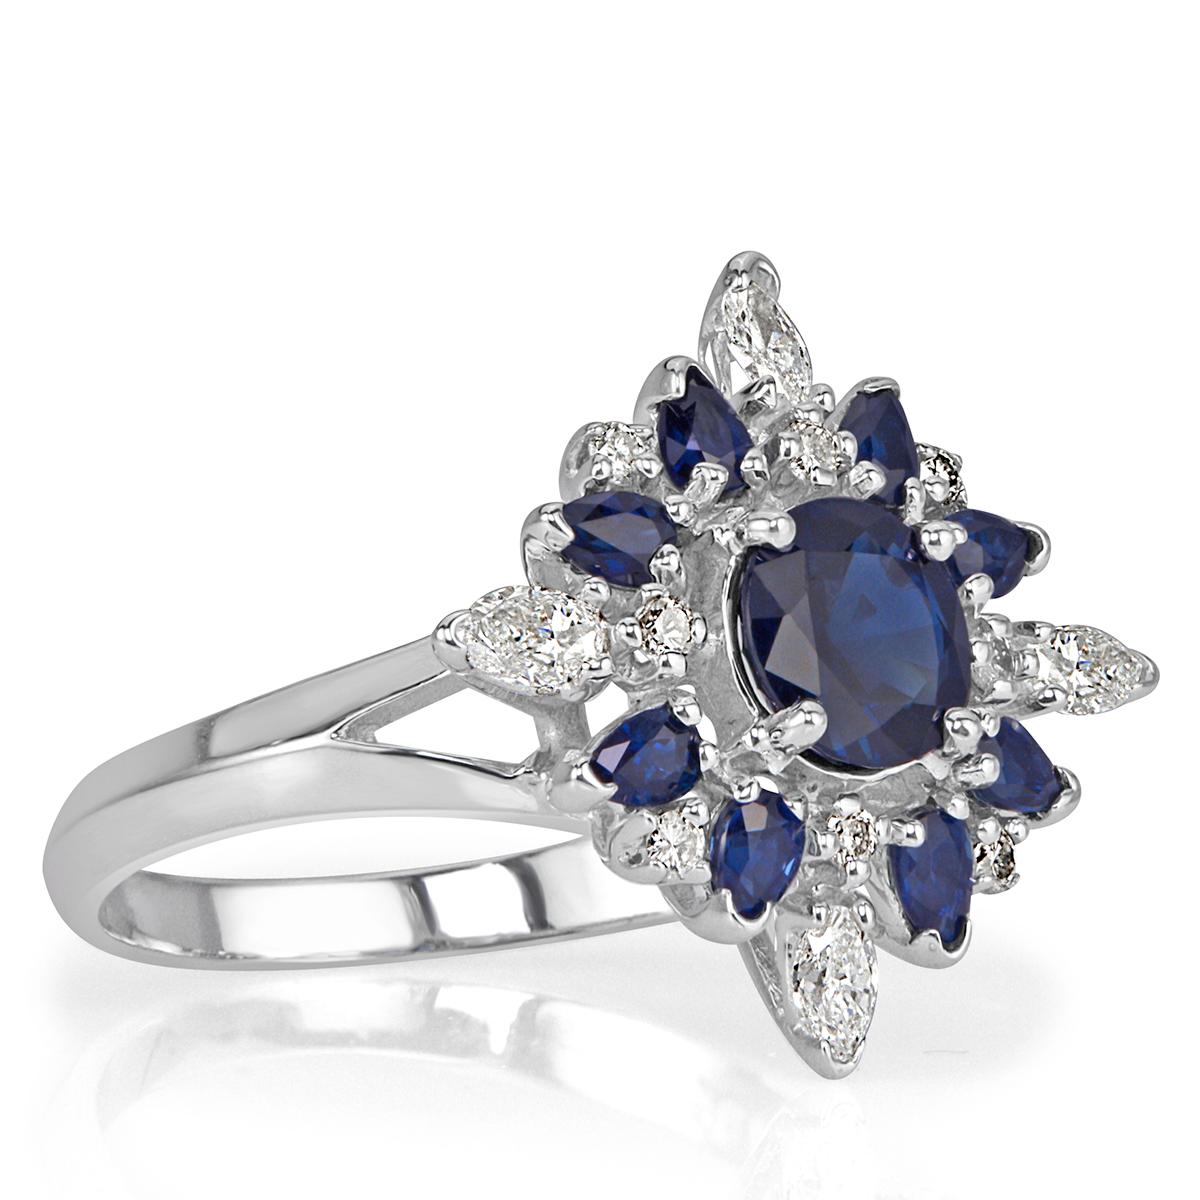 Created in 18k white gold, this stunning sapphire and diamond estate ring showcases a gorgeous 1.02ct round cut sapphire, GIA certified. It is accented by an additional 0.80ct of oval, round brilliant cut and pear shaped diamonds hand set in a